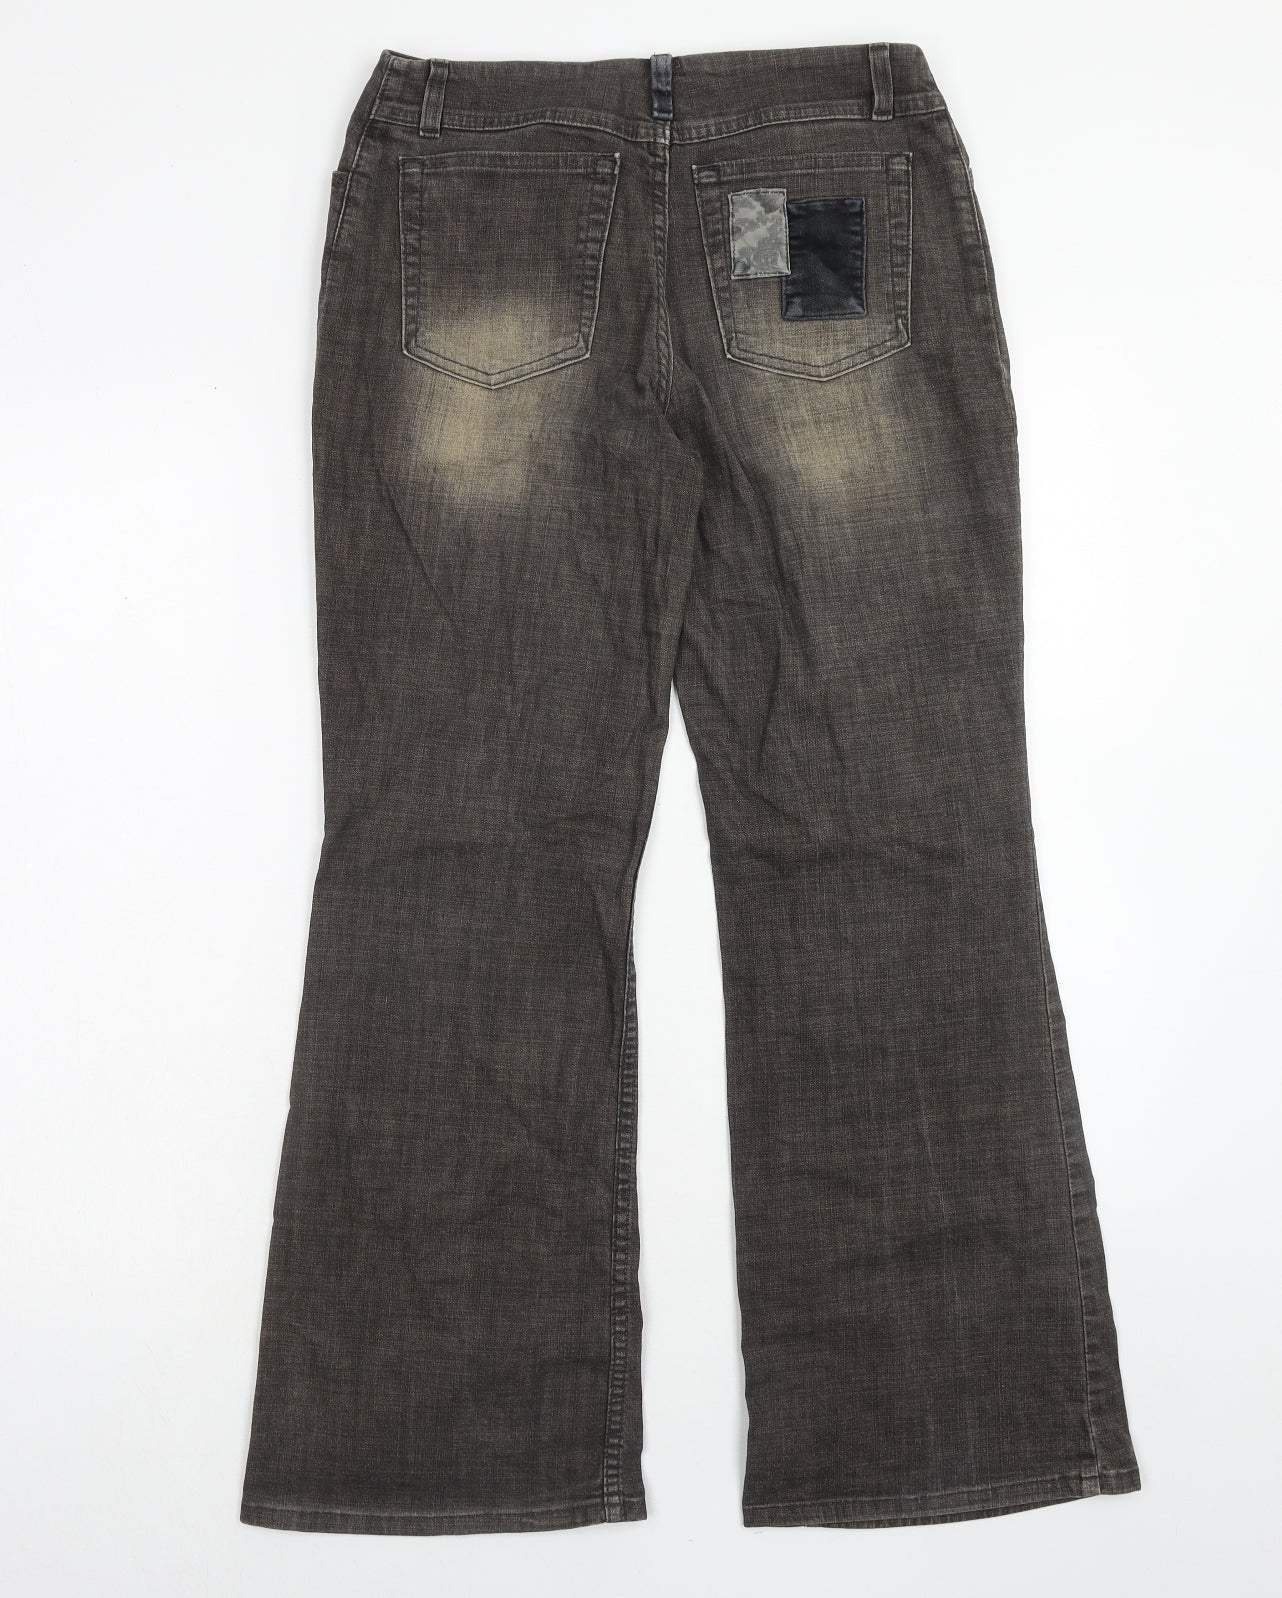 Marks and Spencer Womens Brown Cotton Bootcut Jeans Size 10 Regular Zip - Patchwork